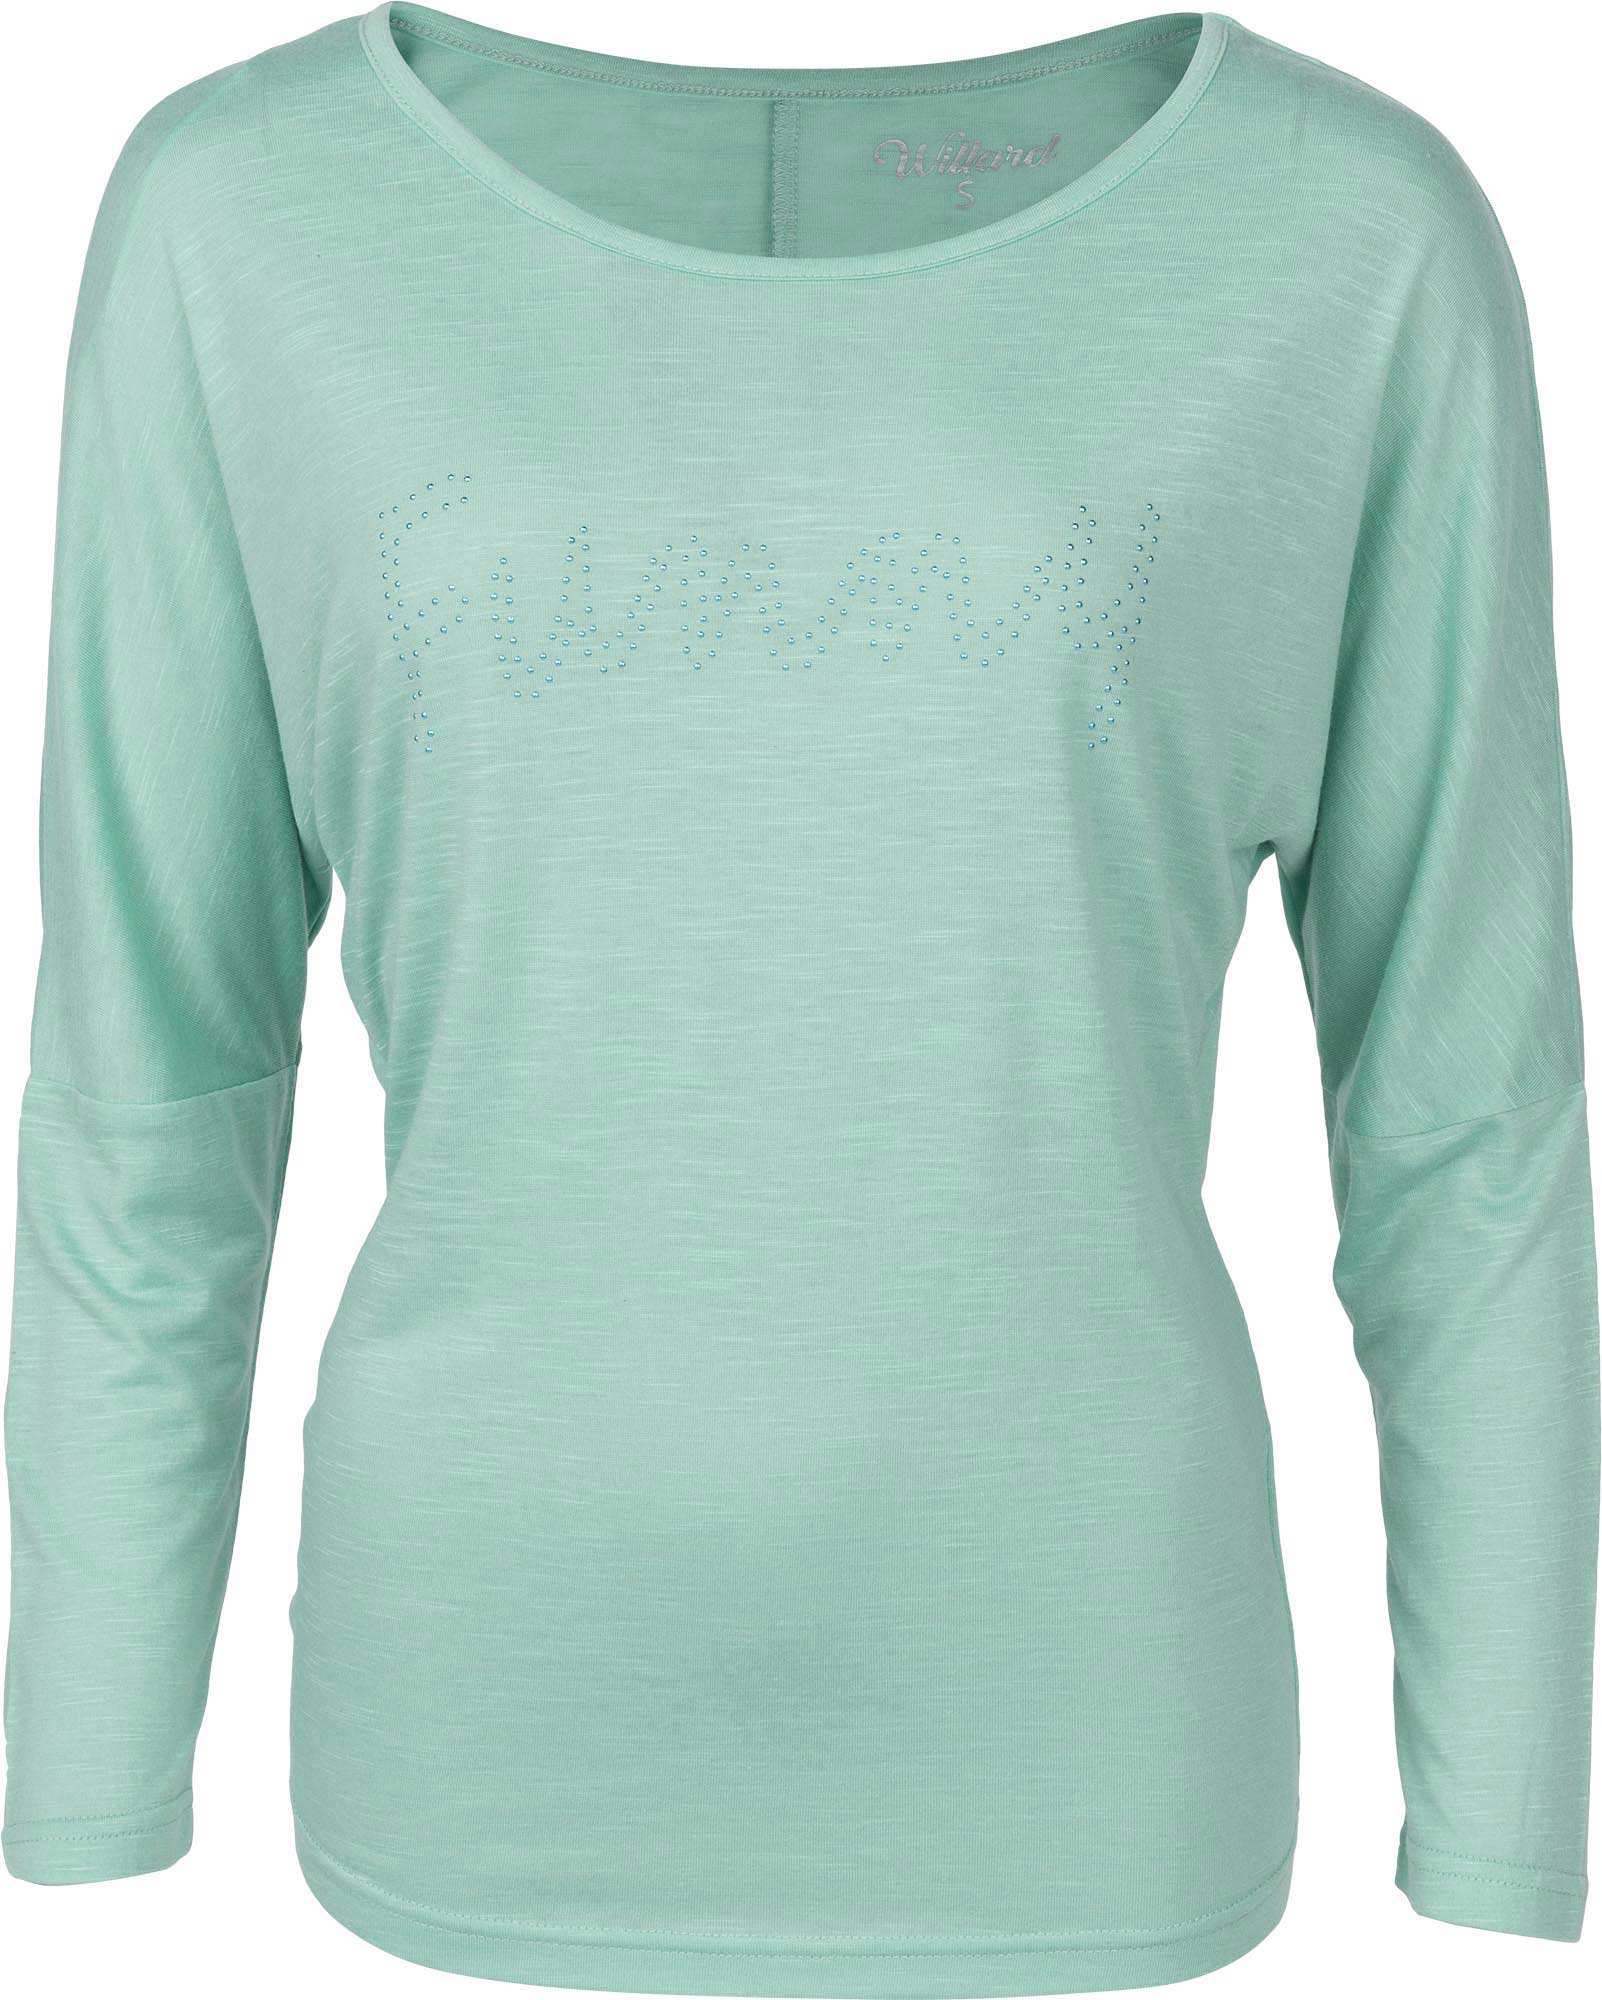 Women’s top with long sleeves